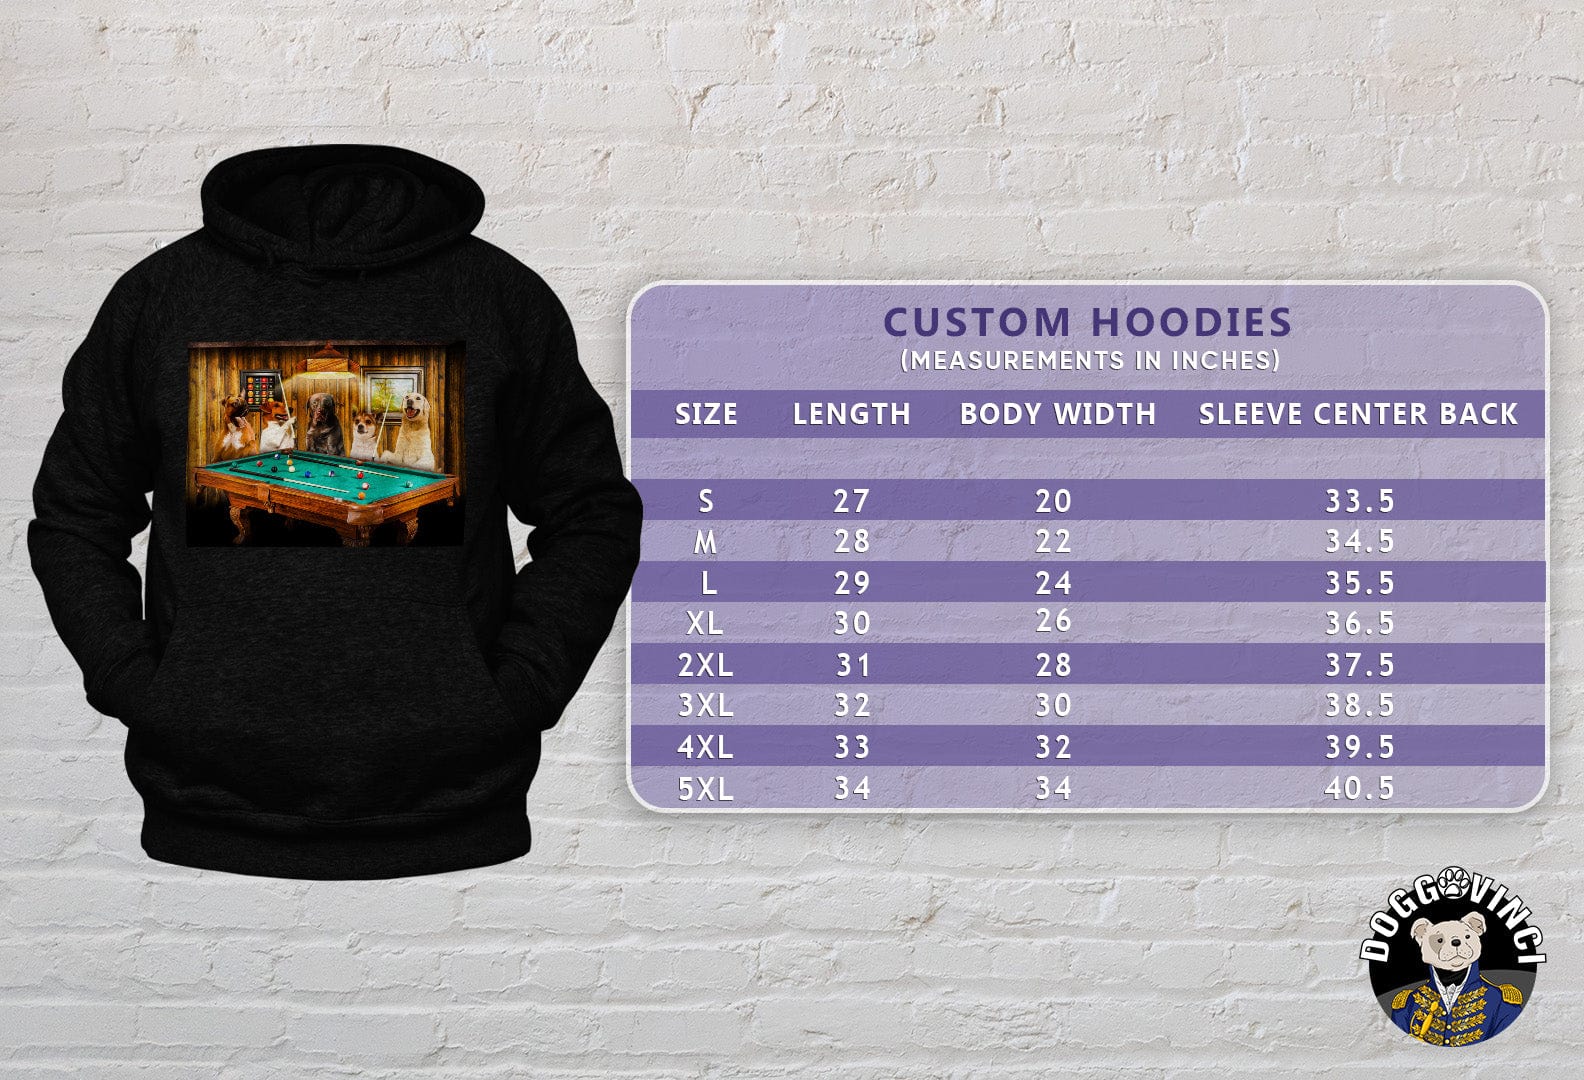 &#39;The Pool Players&#39; Personalized 5 Pet Hoody